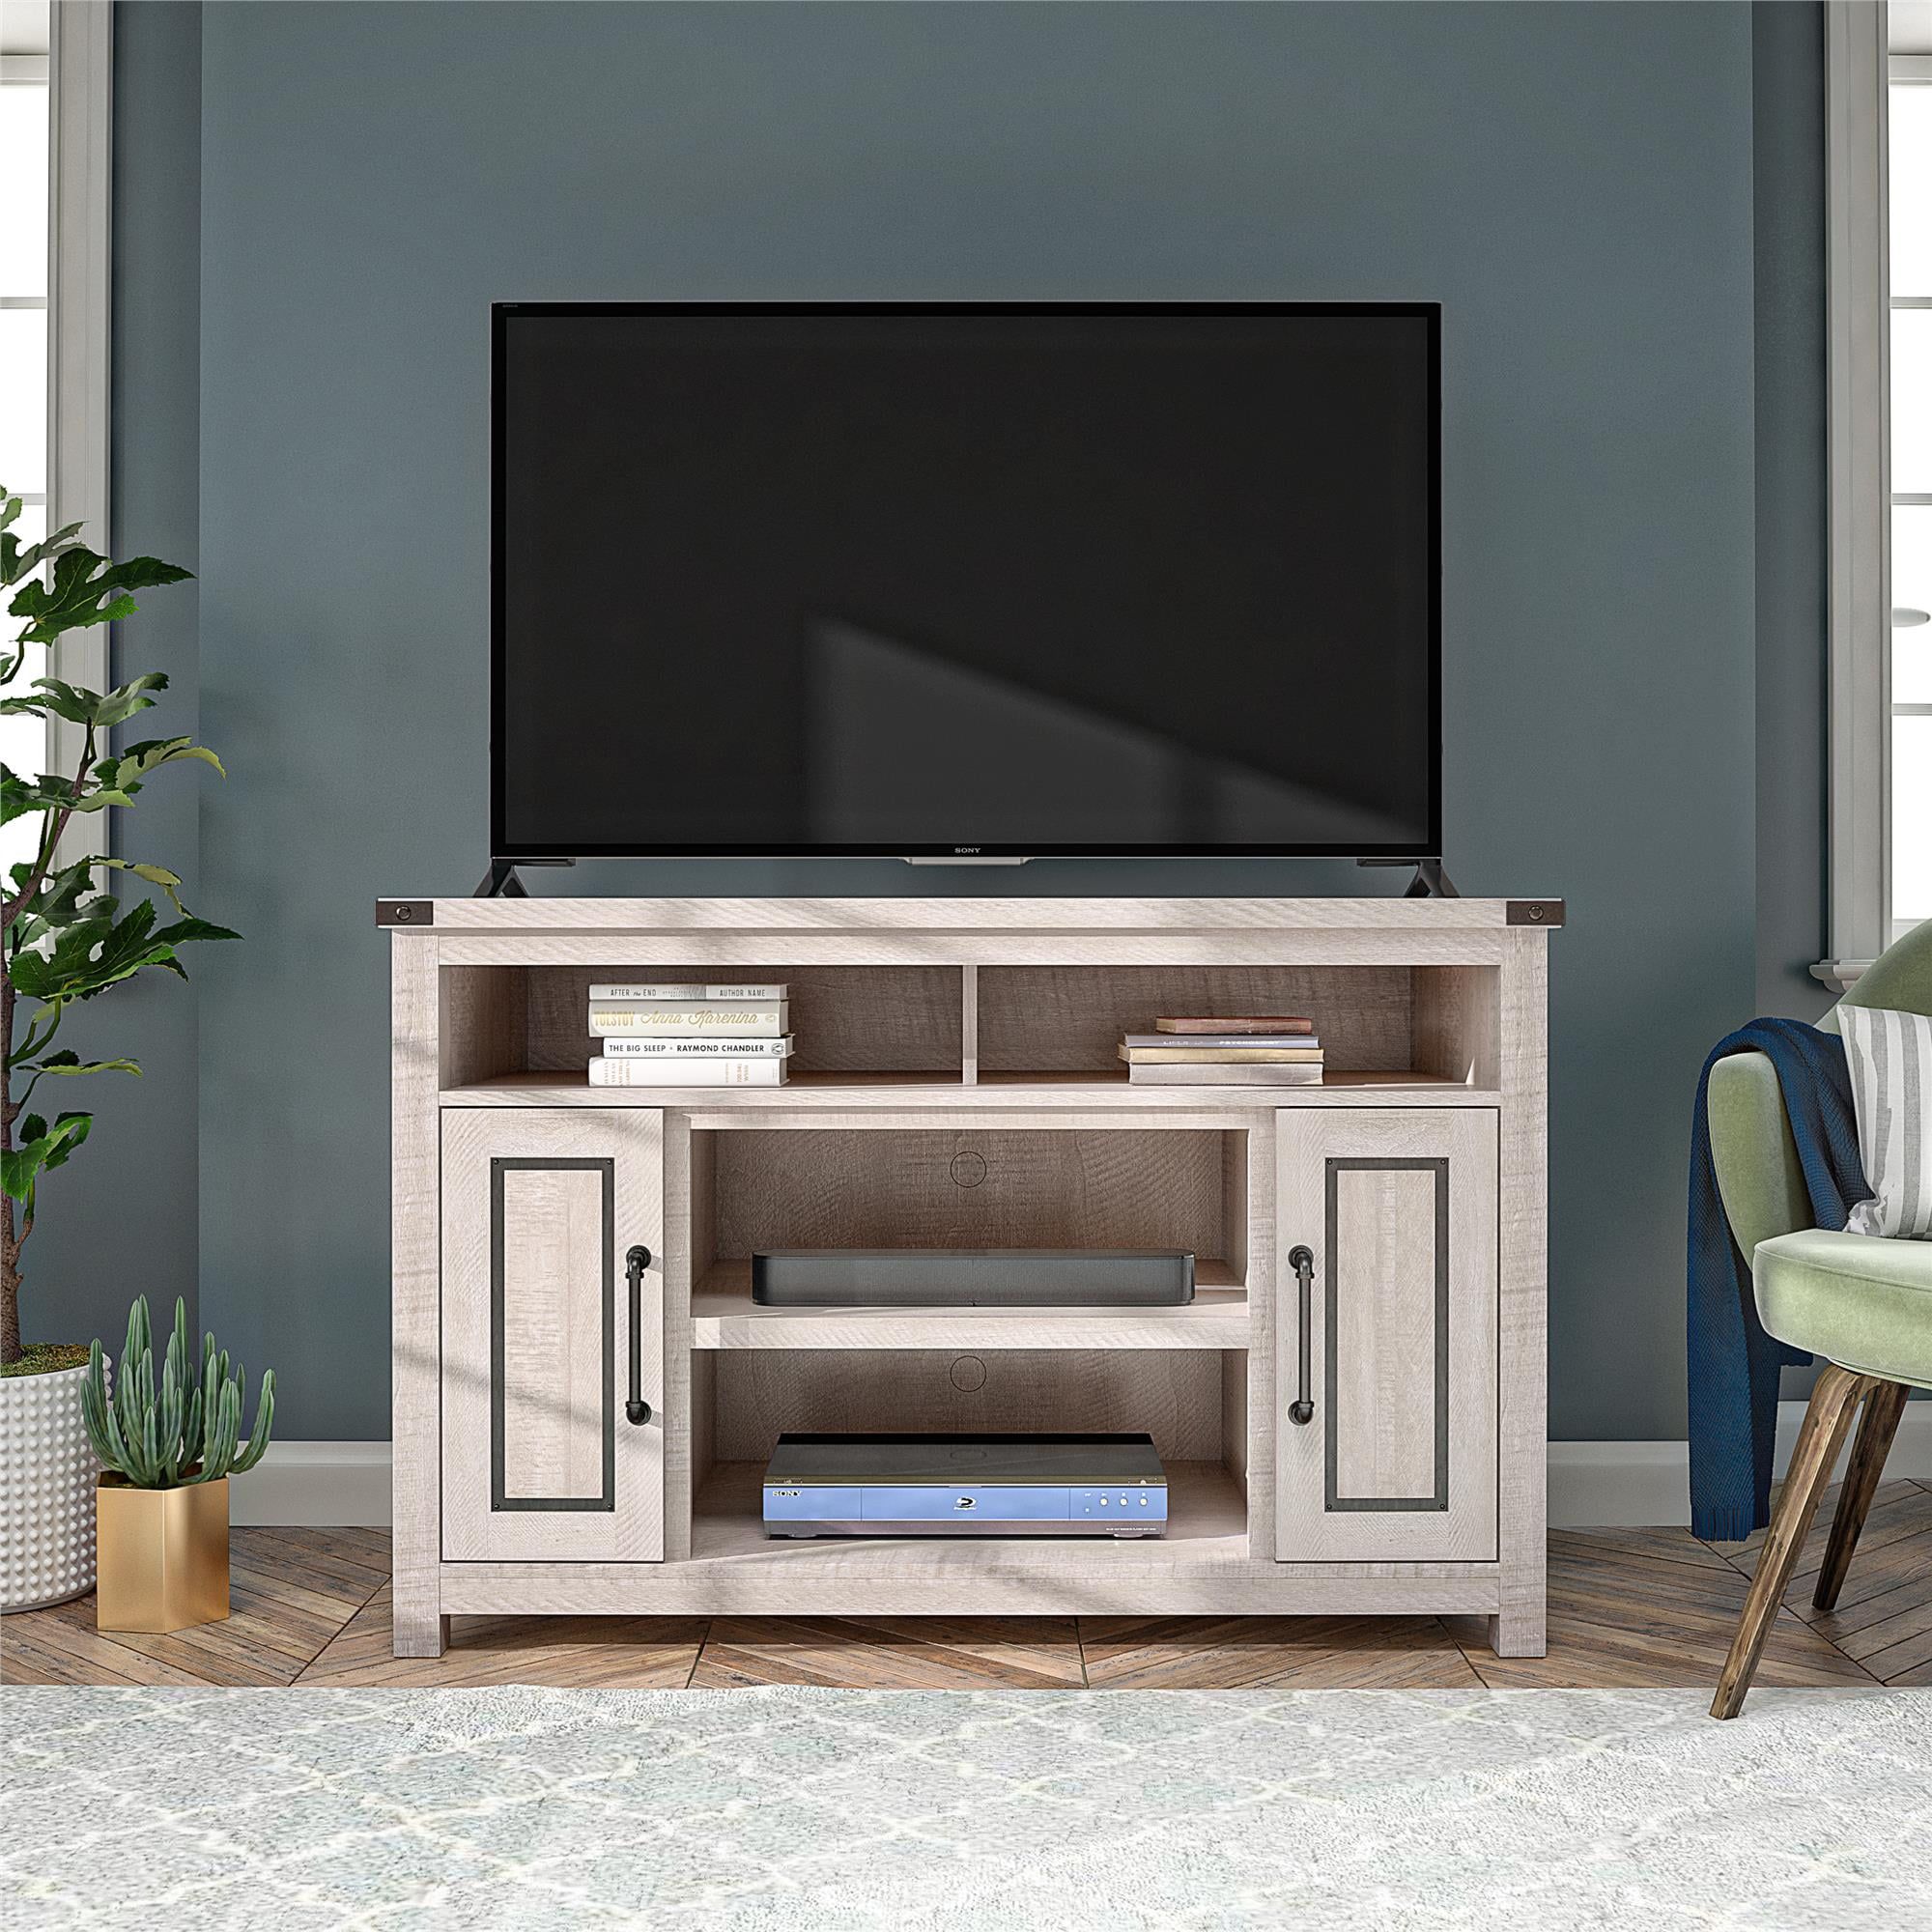 Ameriwood Home Avanta Tv Stand For Tvs Up To 48", Rustic White Within Dual Use Storage Cabinet Tv Stands (Gallery 9 of 20)